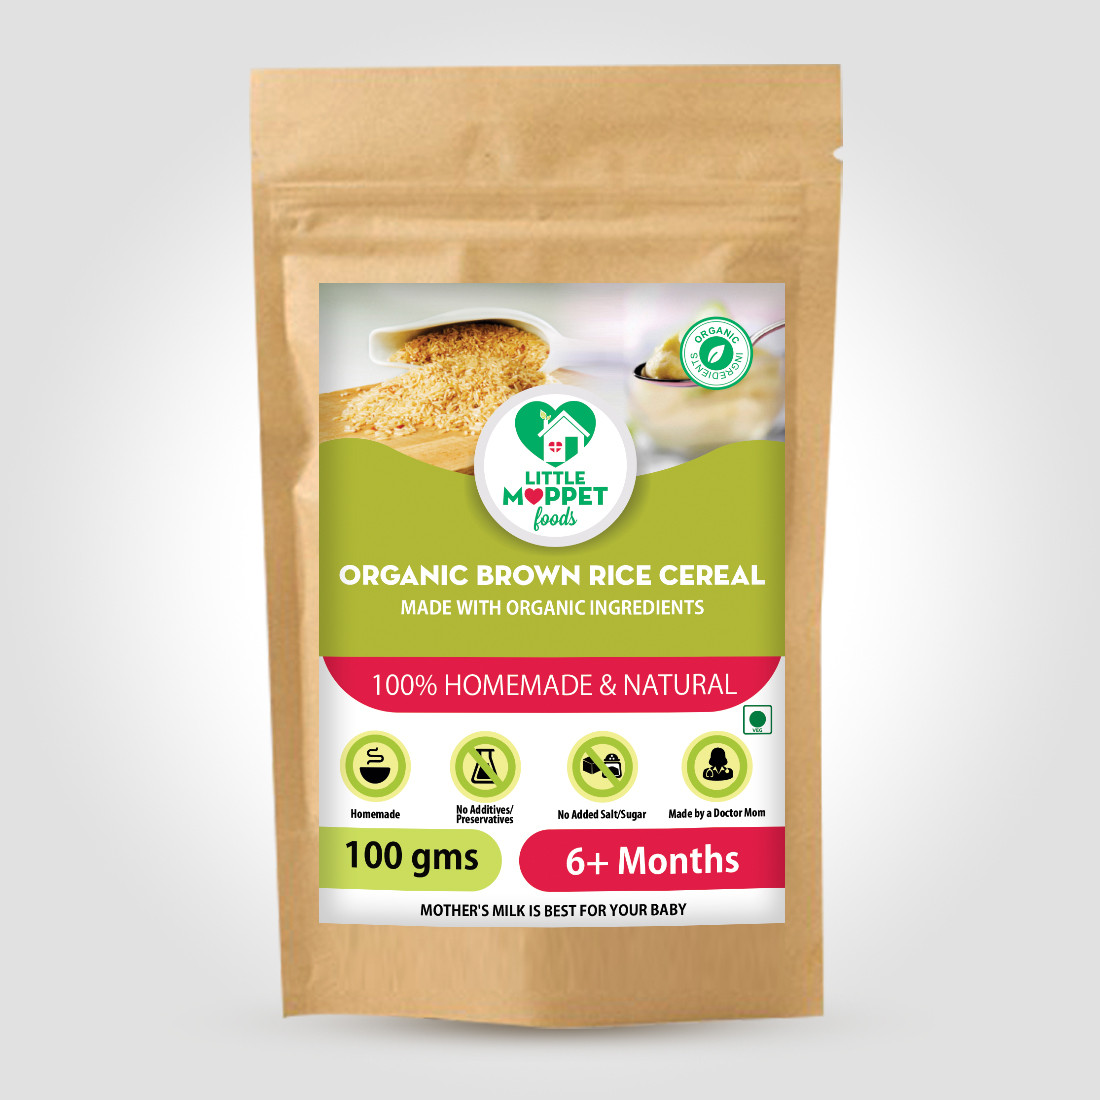 Organic Brown Rice Cereal
 All Trial Packs – MyLittleMoppet Store